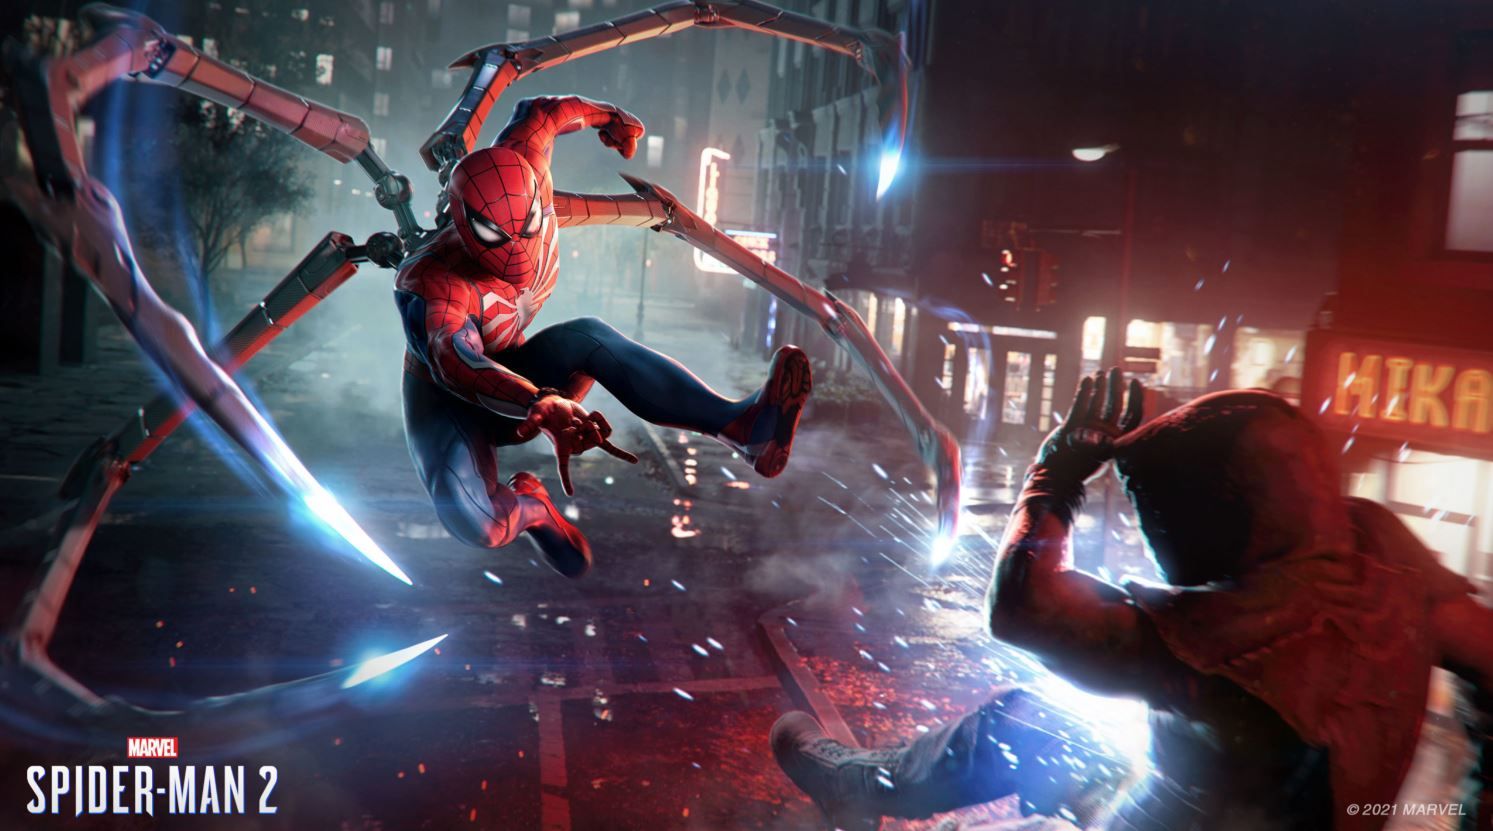 Peter Parker activated his Spider Legs ability in Marvel's Spider-Man 2 trailer